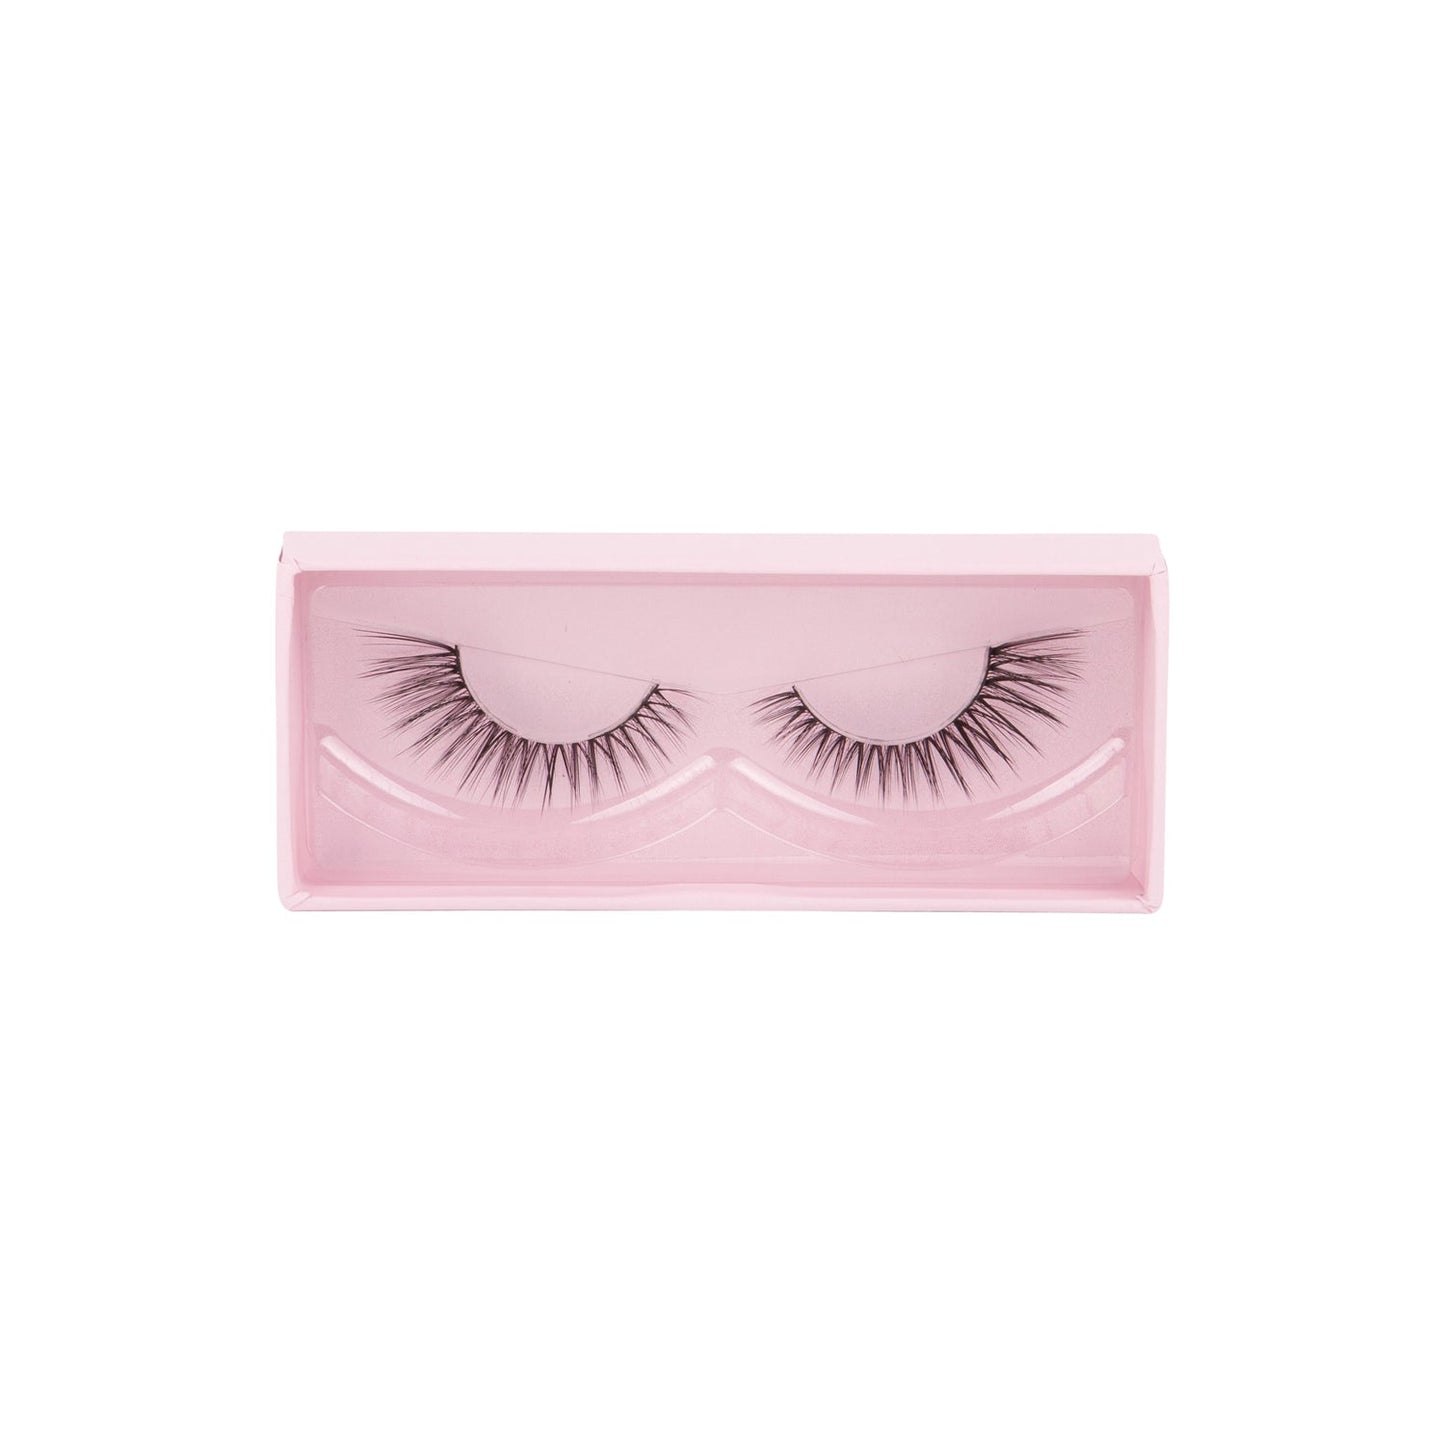 Too Much Ego - 3D Faux Silk Lashes